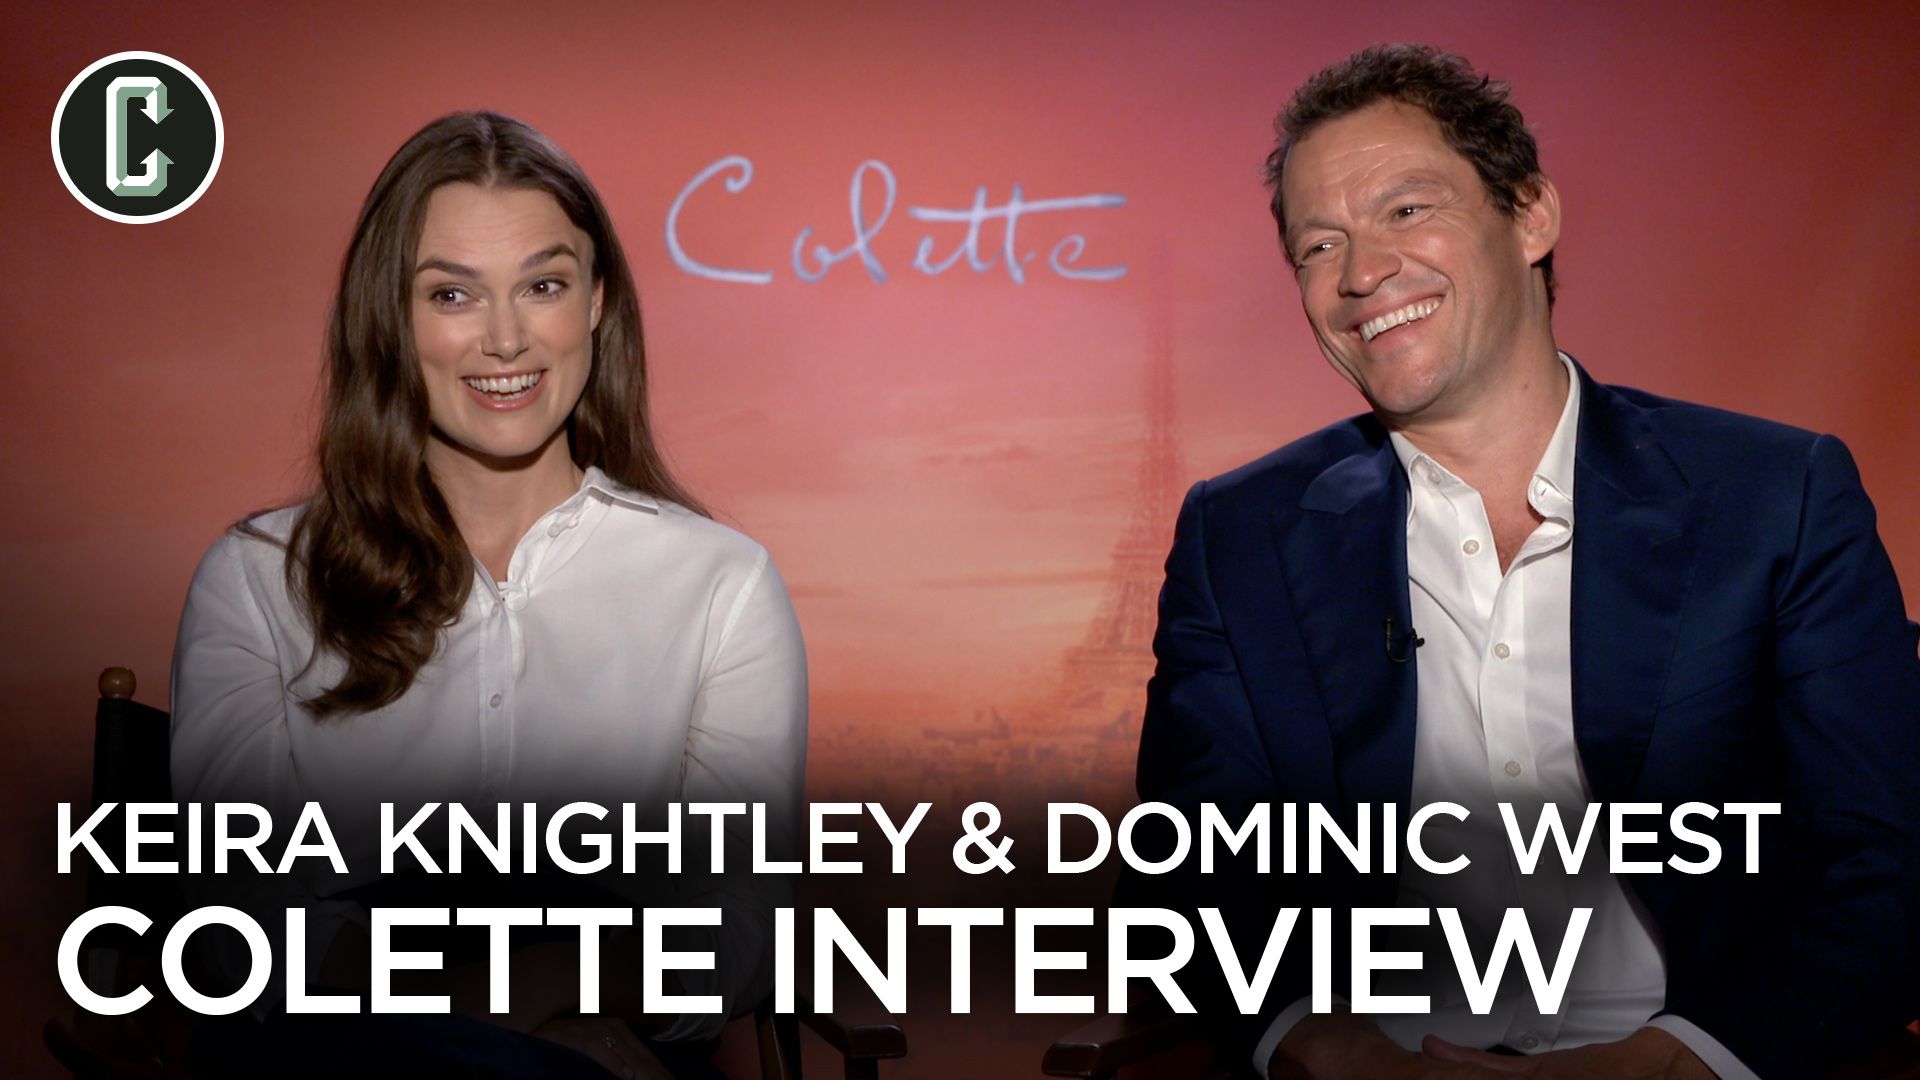 Keira Knightley and Dominic West on the 1920 x 1080